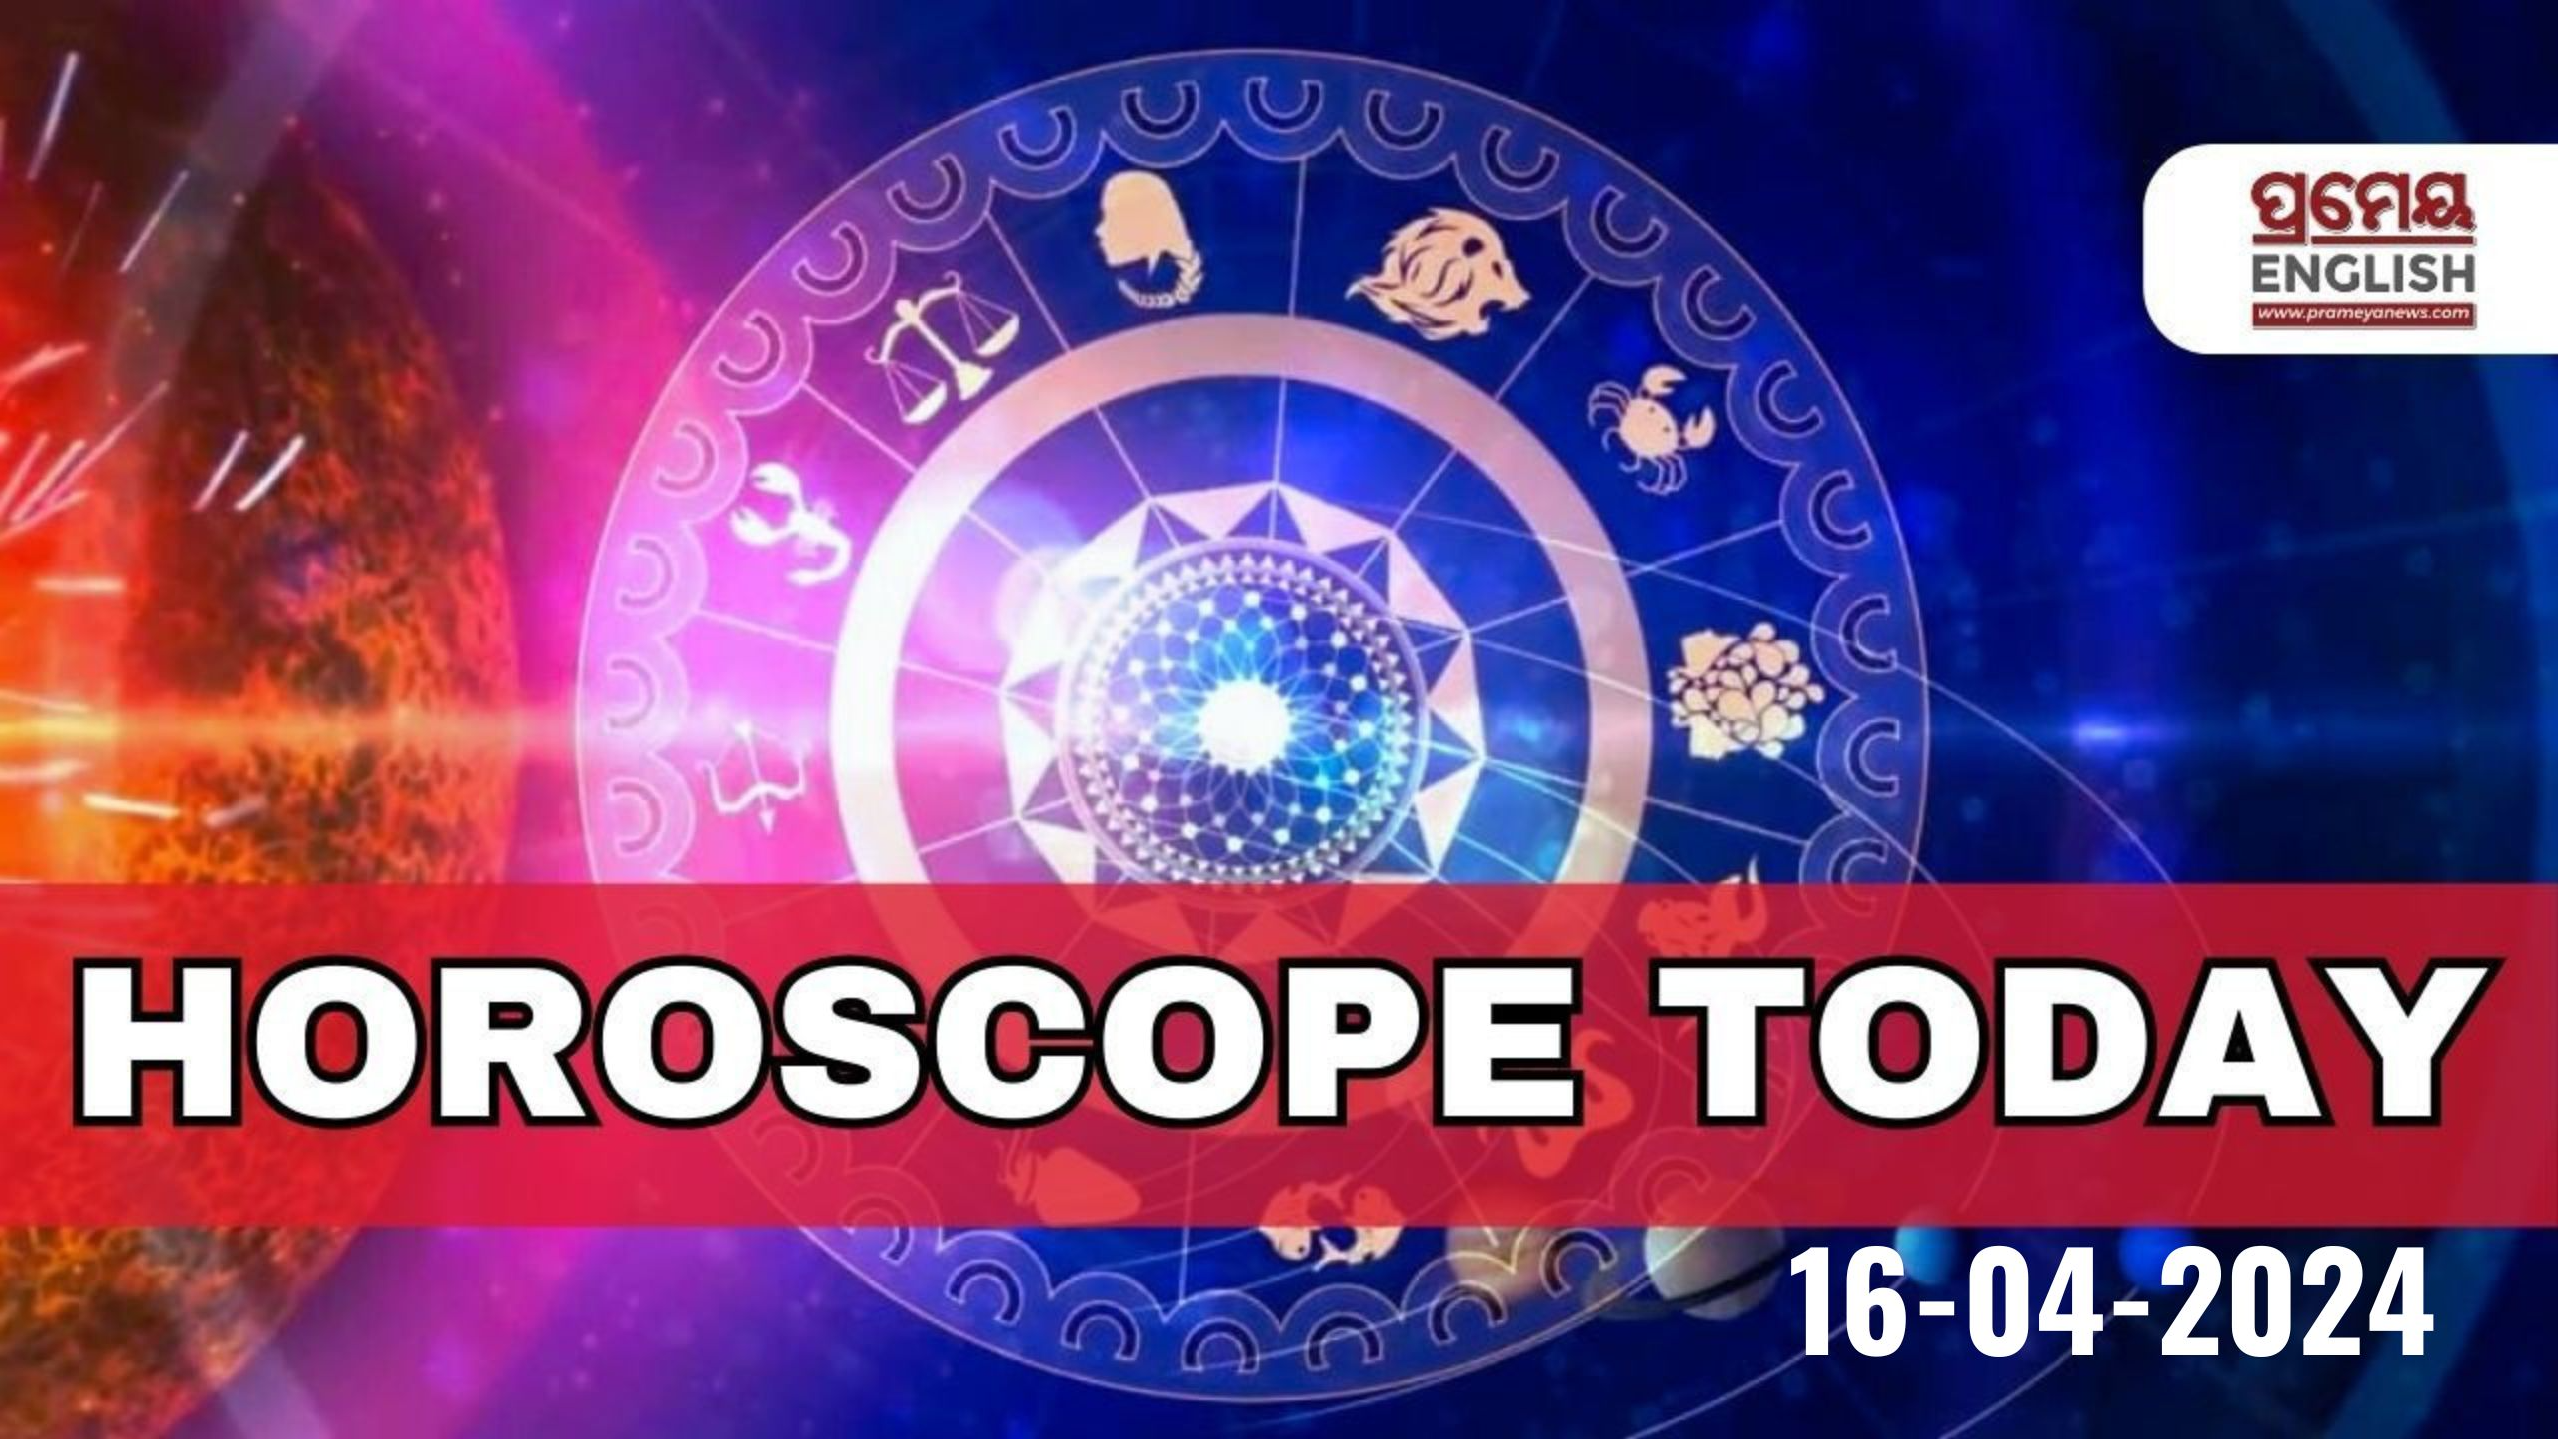 Horoscope Today: Astrological prediction for April 27, 2024